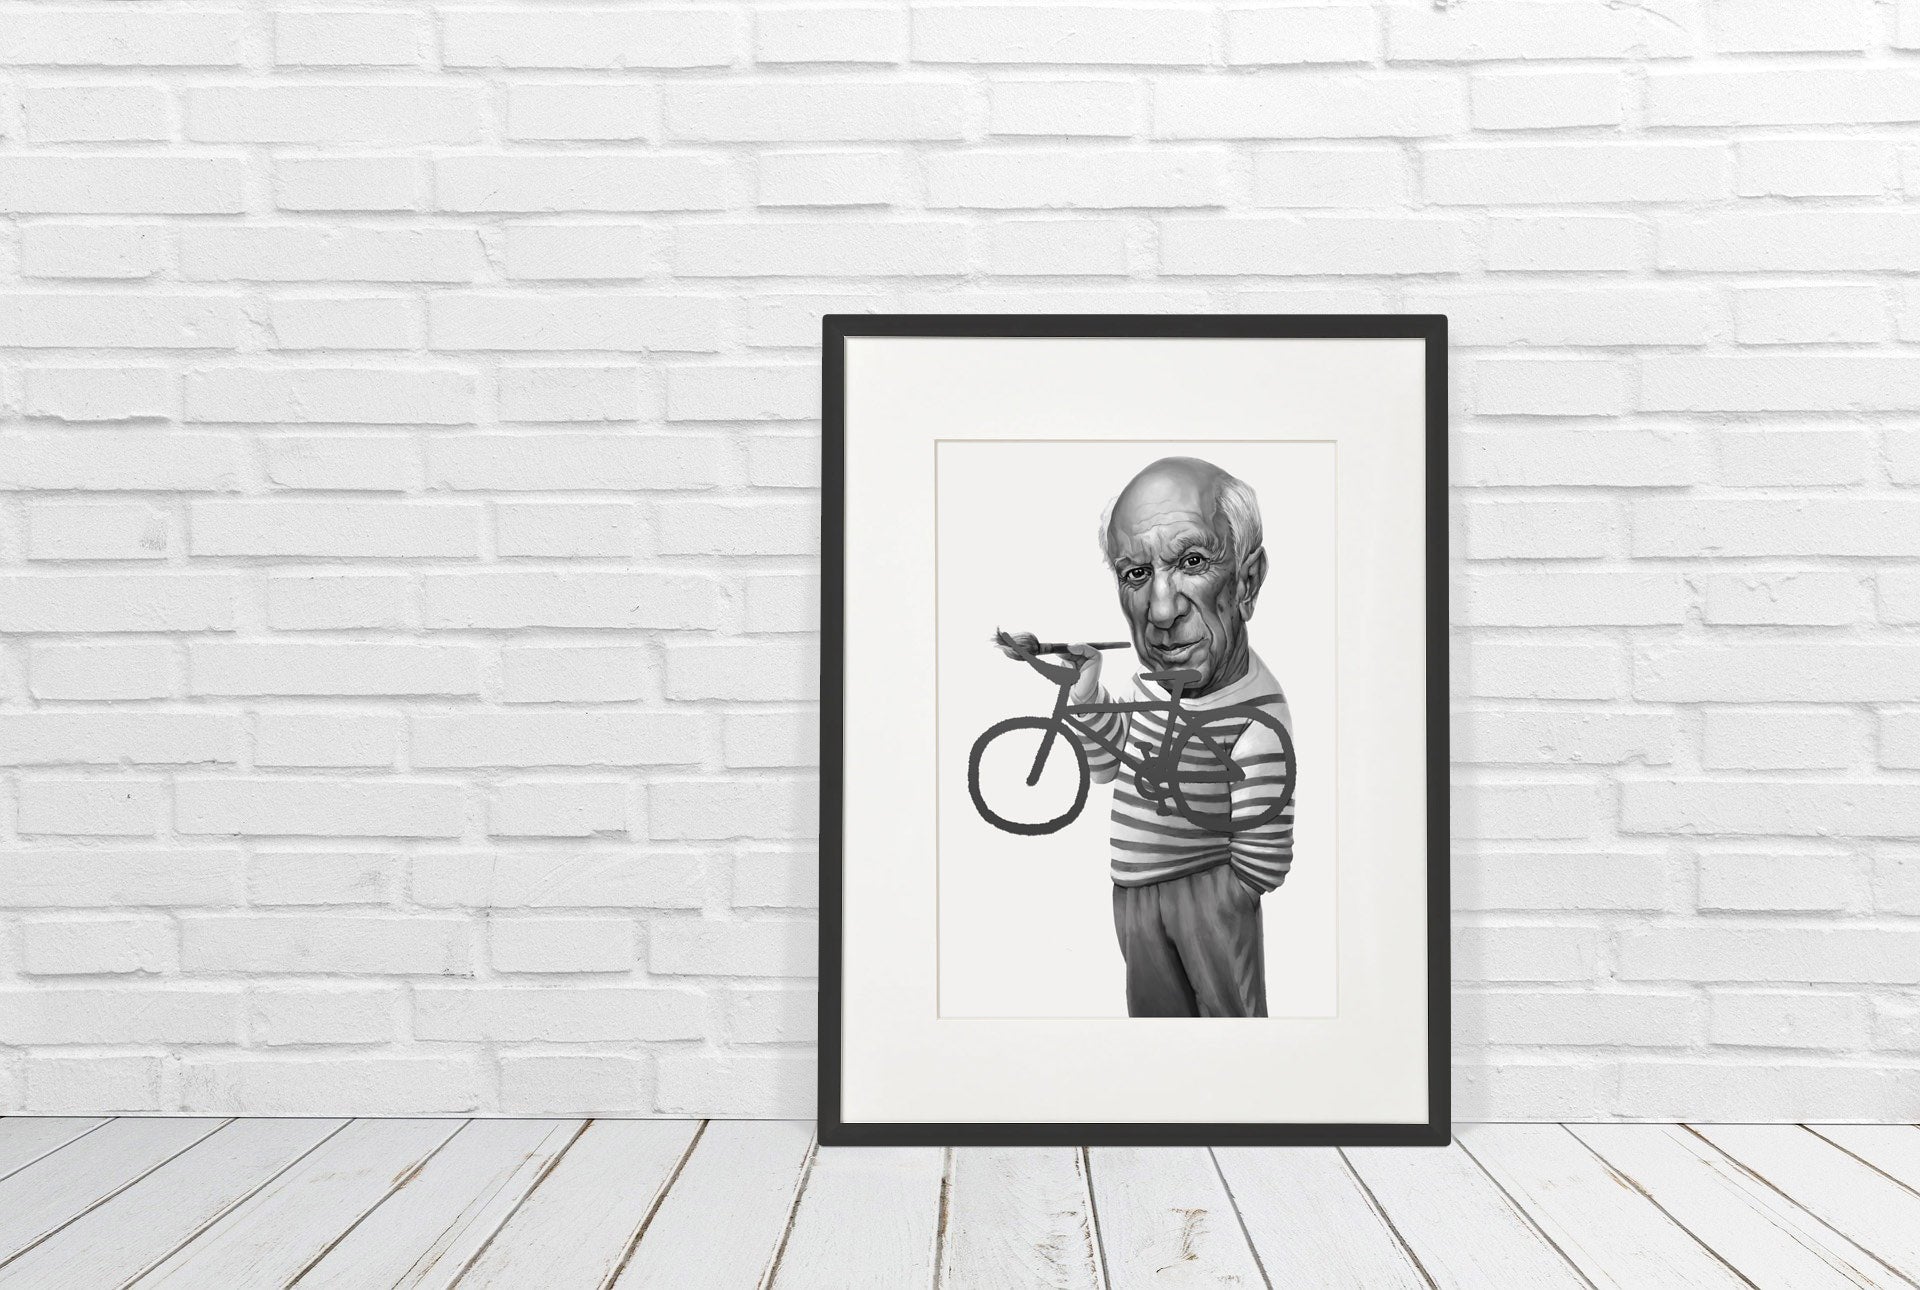 CYCLING ART | PABLO PICASSO AT WORK